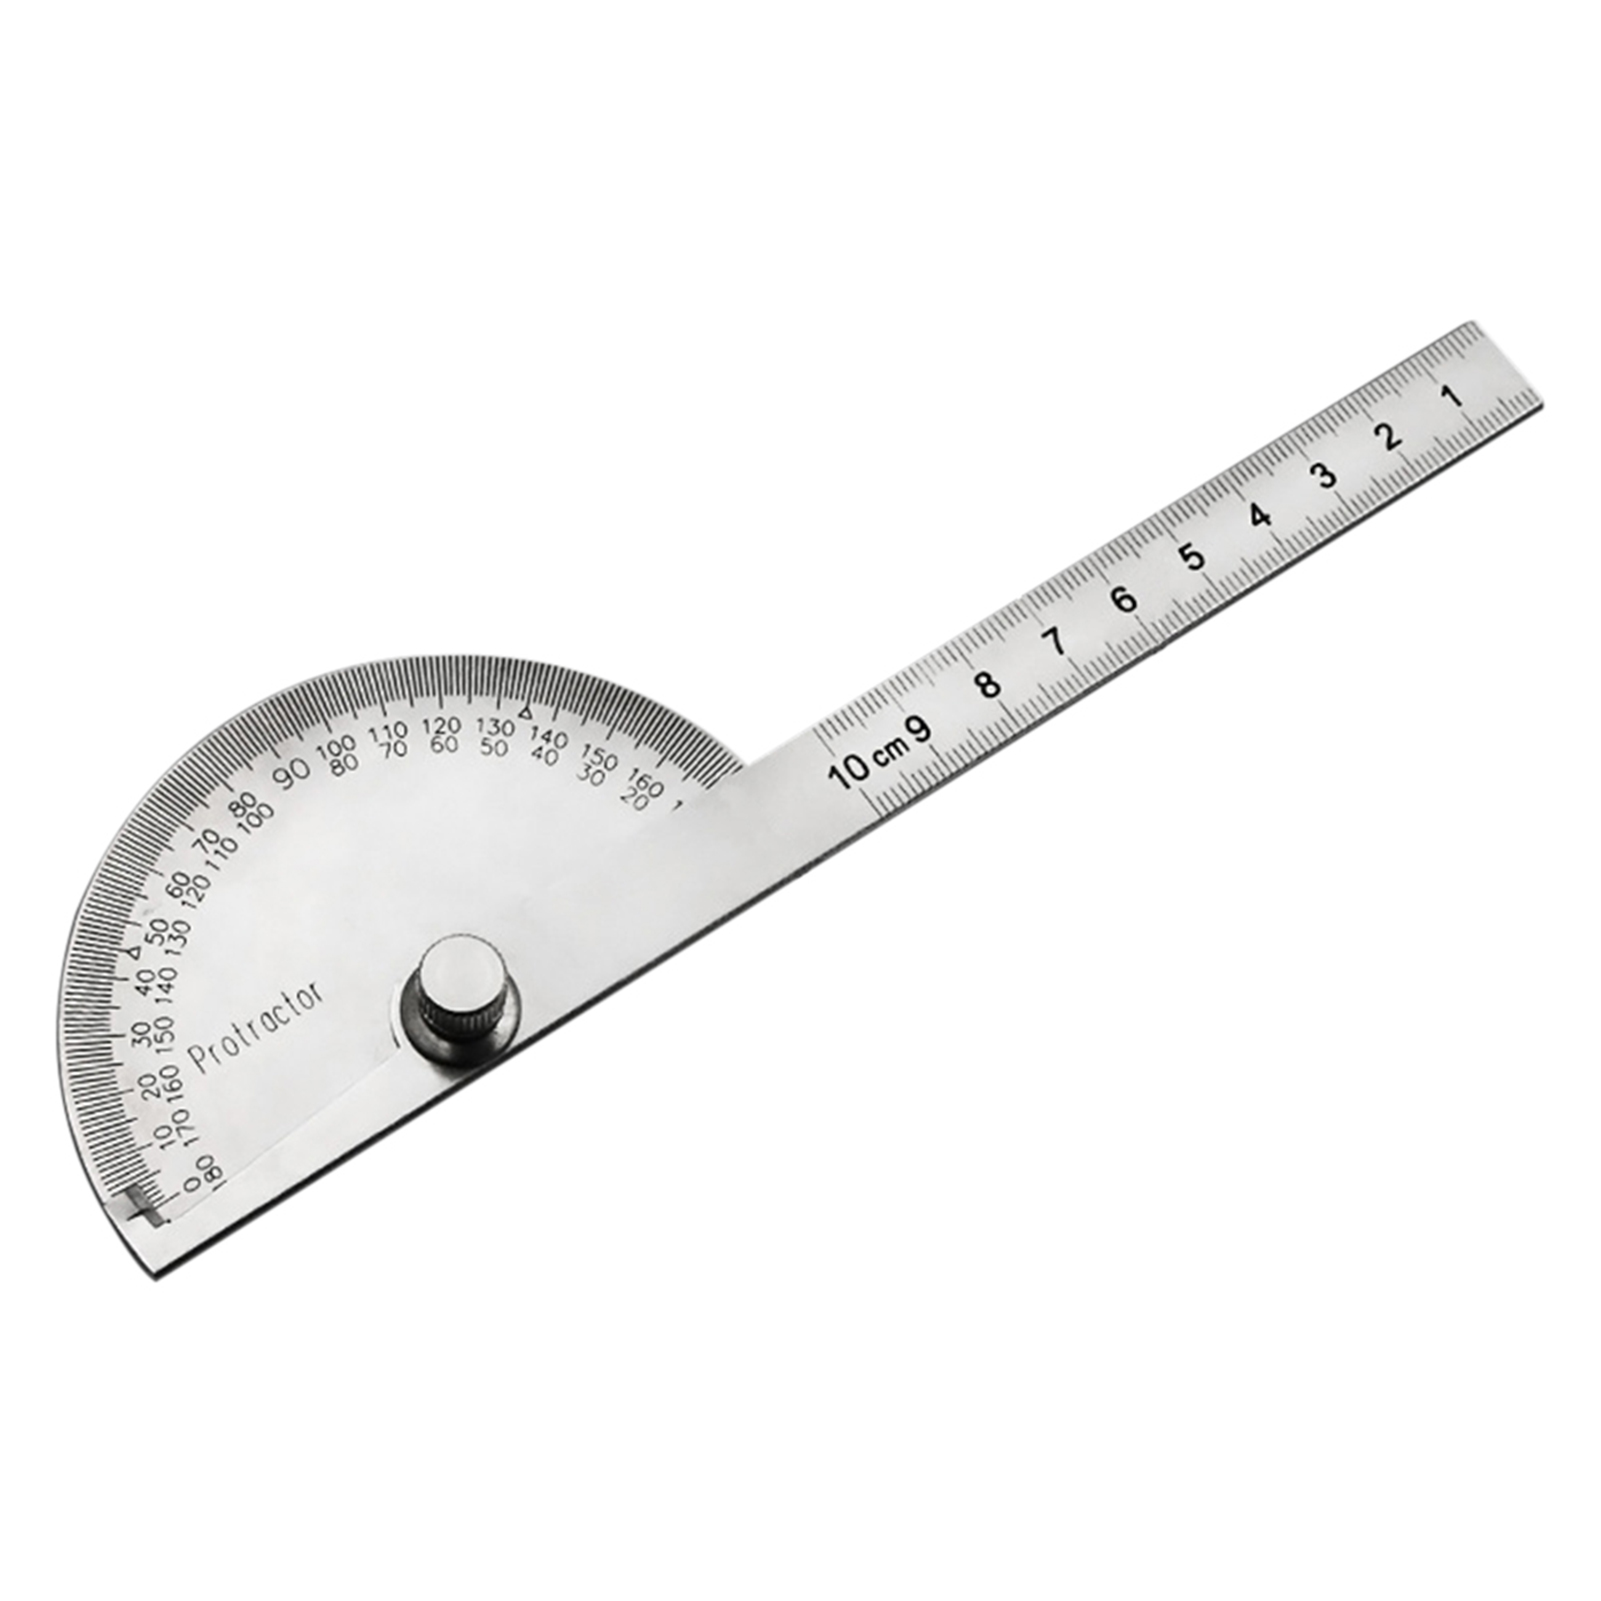 Handheld Angle Ruler Adjustable Protractor 180 Degree Gauge Stainless Steel Measuring Tool Woodworking DIY 0-100mm Clear Scale